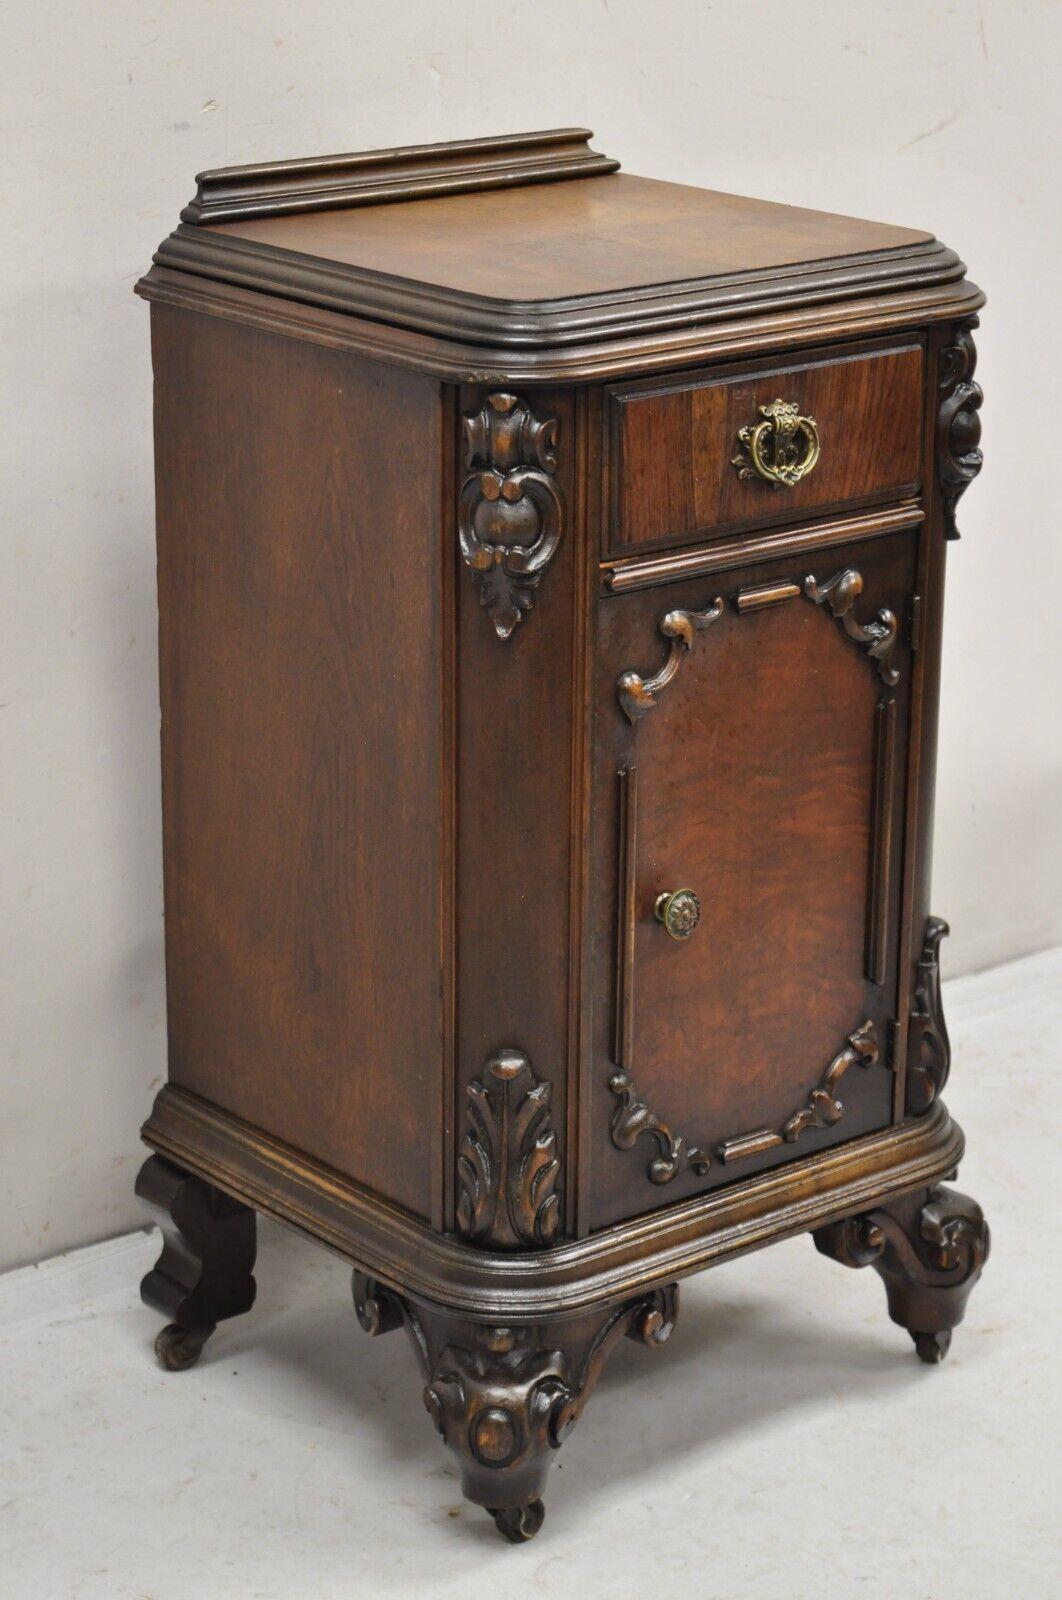 Antique Carved Walnut Renaissance Revival Depression Nightstand Bedside Table. Item features one dovetailed drawers, one swing door, nicely carved details, rolling casters. Circa Early 20th Century. Measurements: 31